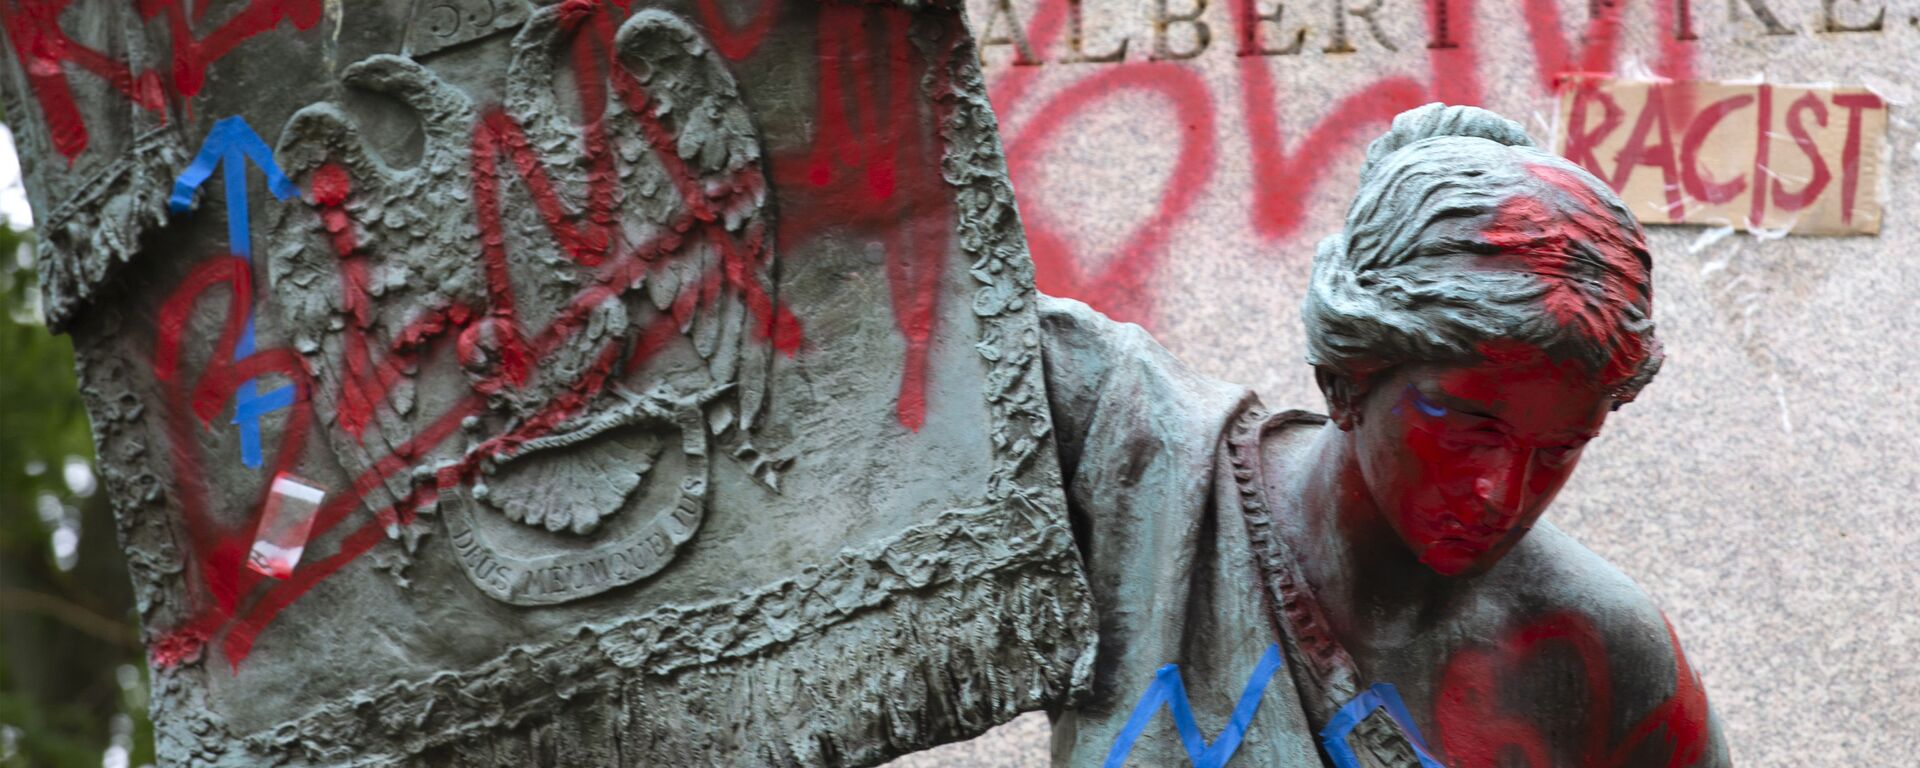 The bronze sculpture representing the Goddess of Masonry on the base of the statue of a Confederate general, Albert Pike, is seen with red paint, after protestors toppled Pike statue's and set on fire early Saturday, June 20, 2020, in Washington. It comes on Juneteenth, the day marking the end of slavery in the United States, amid continuing anti-racism demonstrations following the death of George Floyd in Minneapolis - Sputnik International, 1920, 31.05.2021